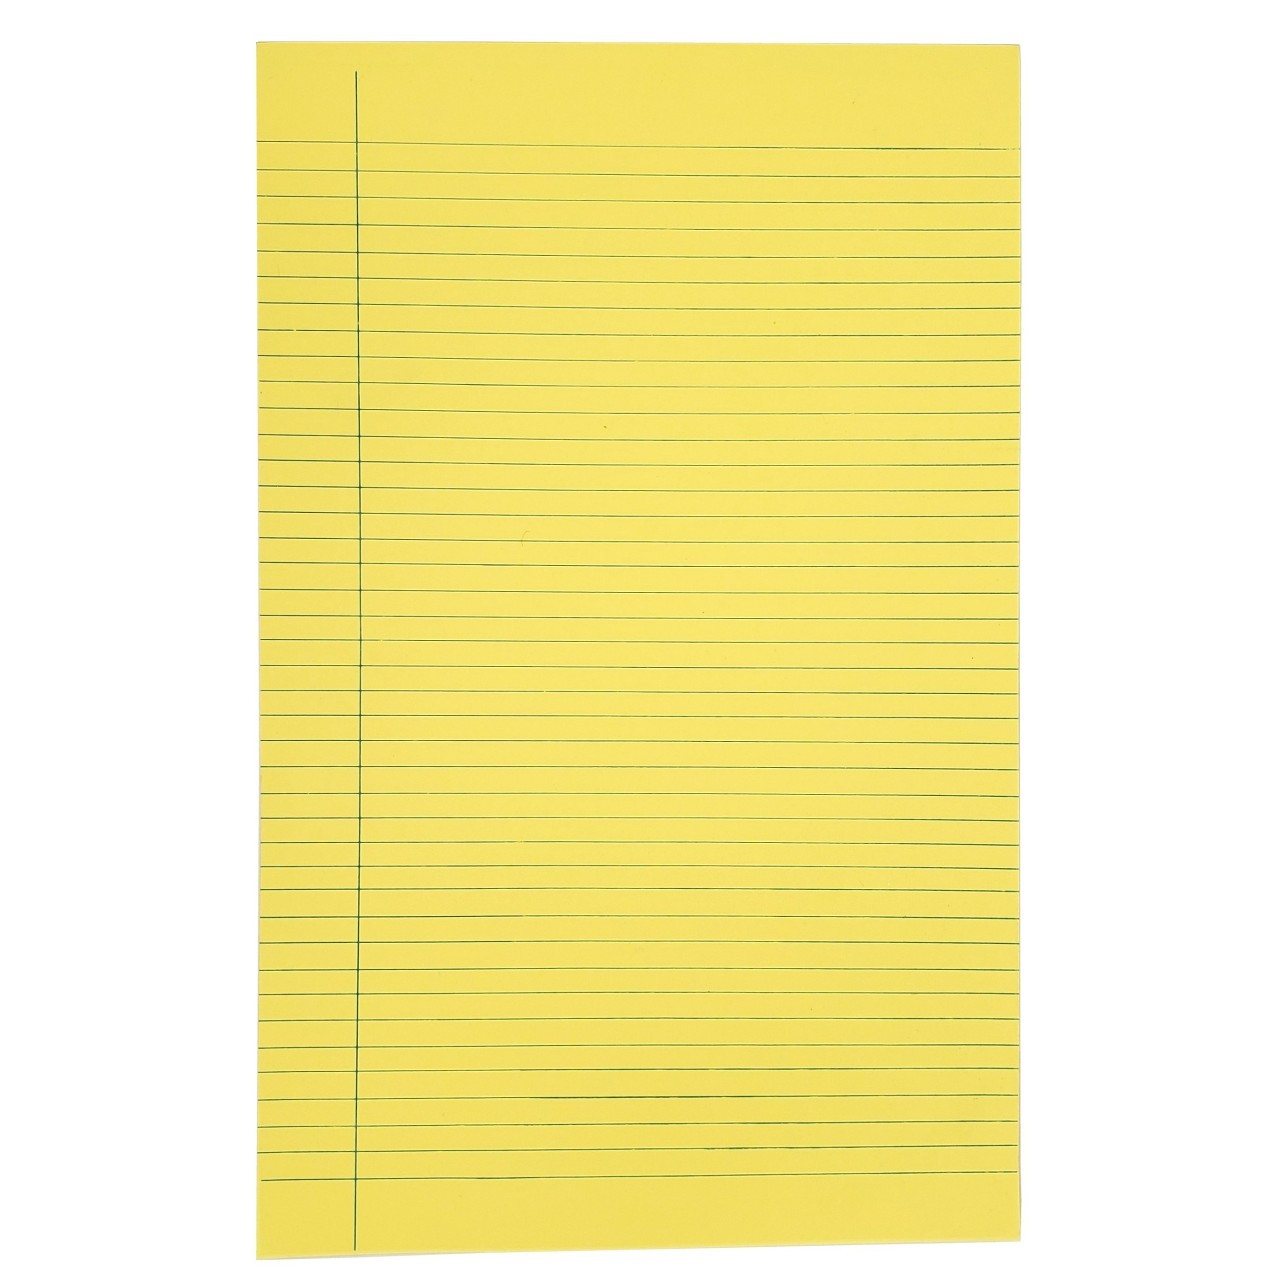 LEGAL PAD FULL SIZE YELLOW 1ct